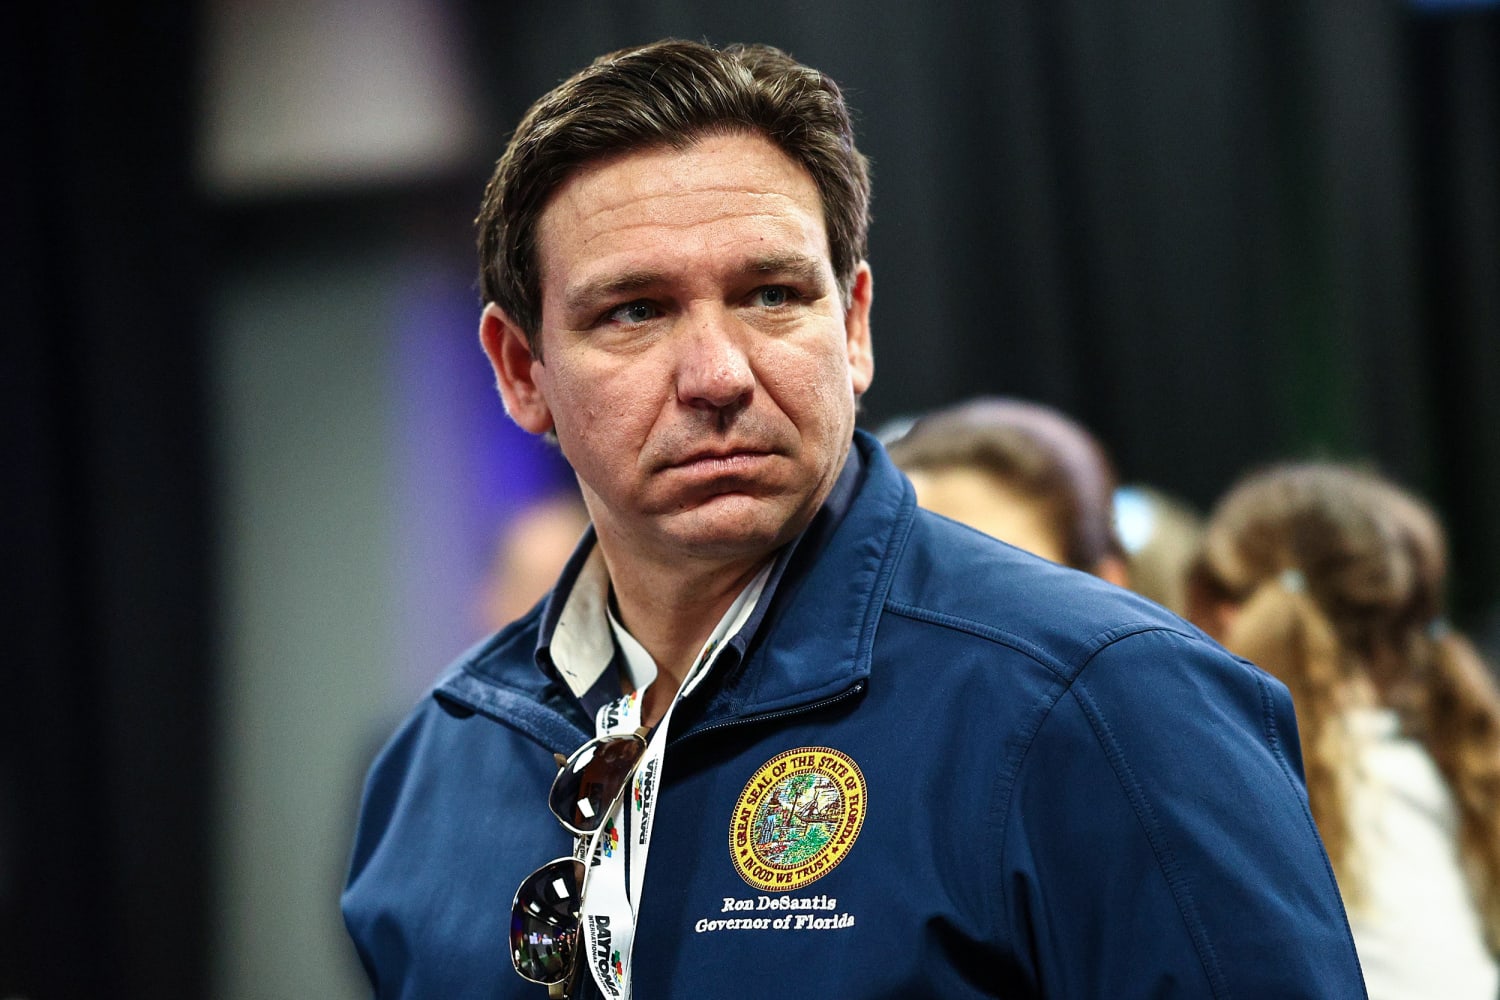 Ron DeSantis Rules Out VP Role Sed Leaves Open For 2028